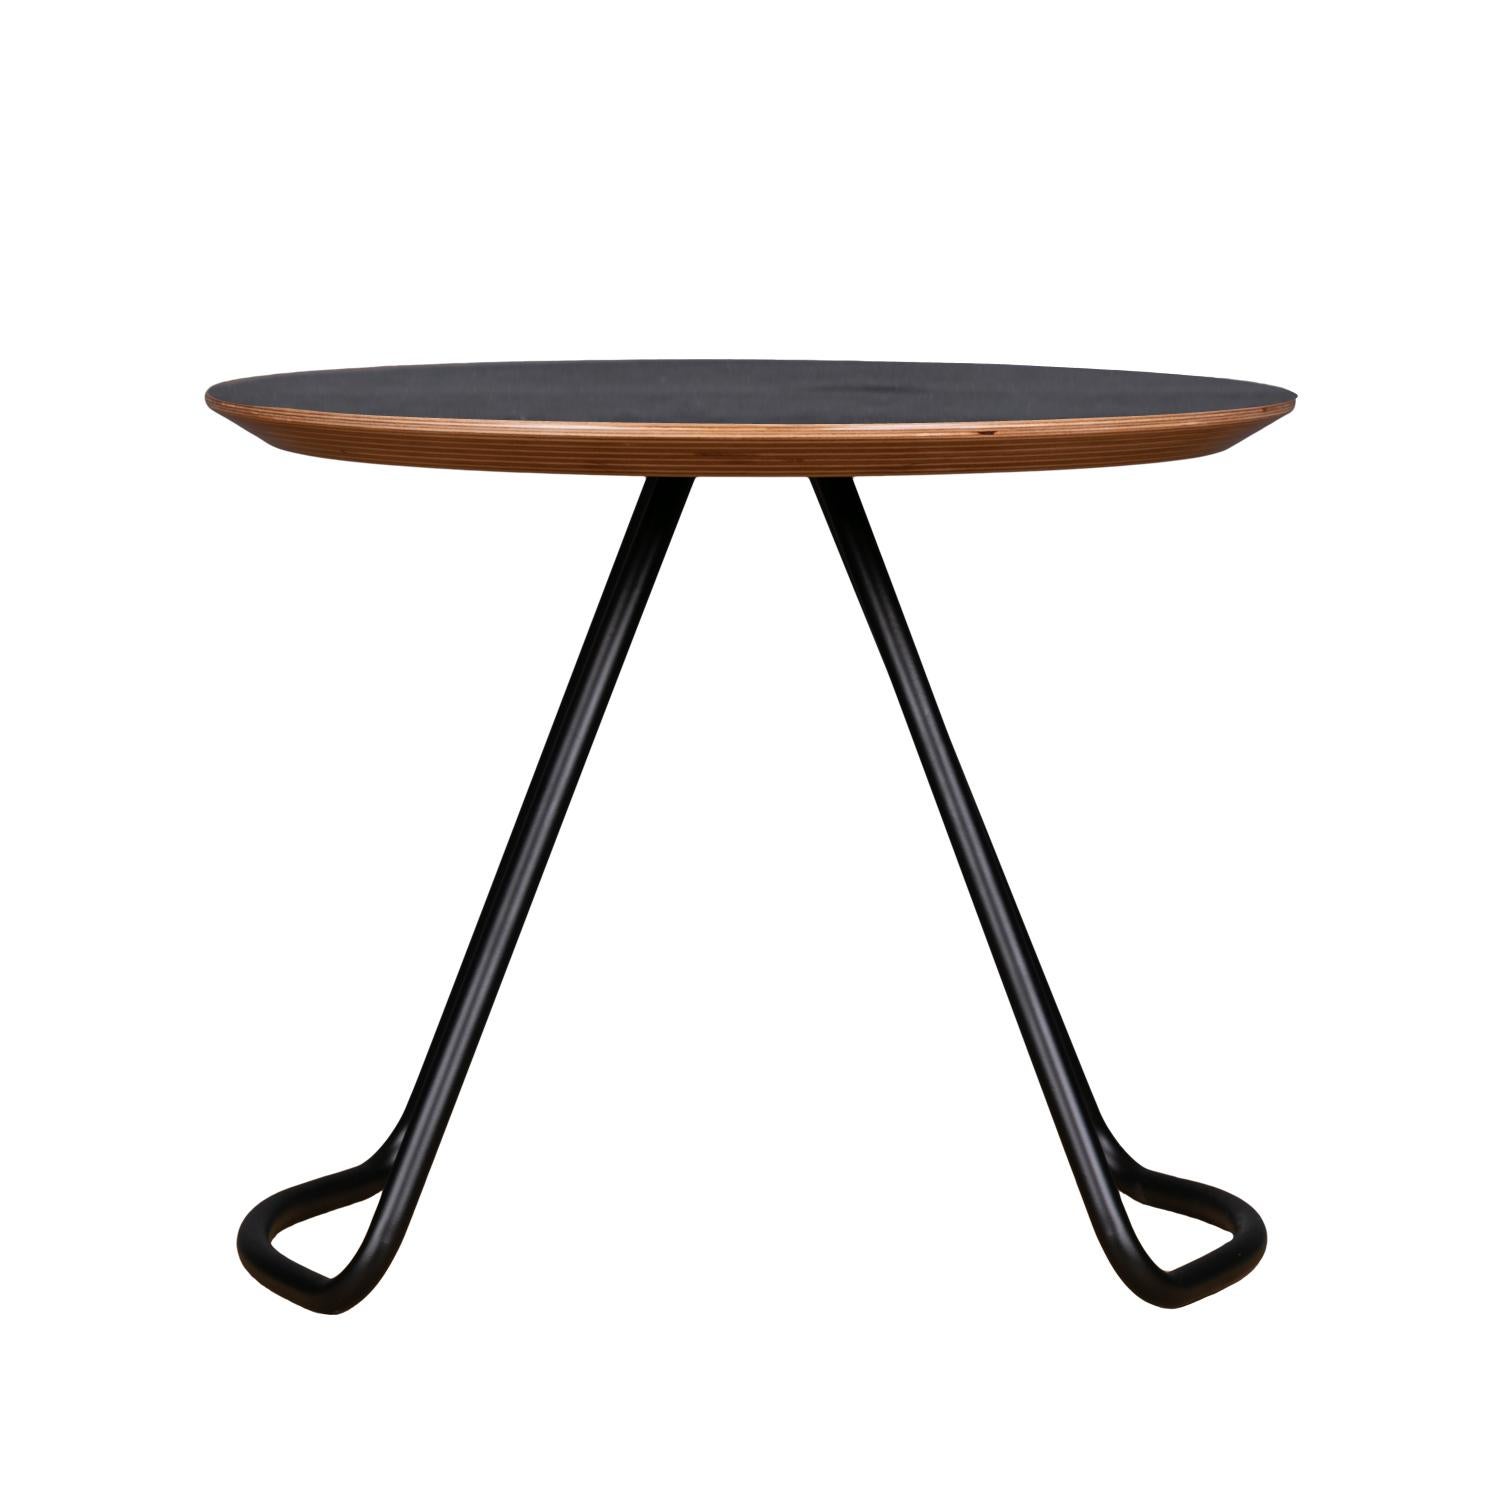 Sama coffee table is part of the Sama collection, which provides functionality through simple, yet striking and sculptural forms that add a unique and elegant touch to its environment.

Inspired by the poetry of whirling costumes worn in Sama